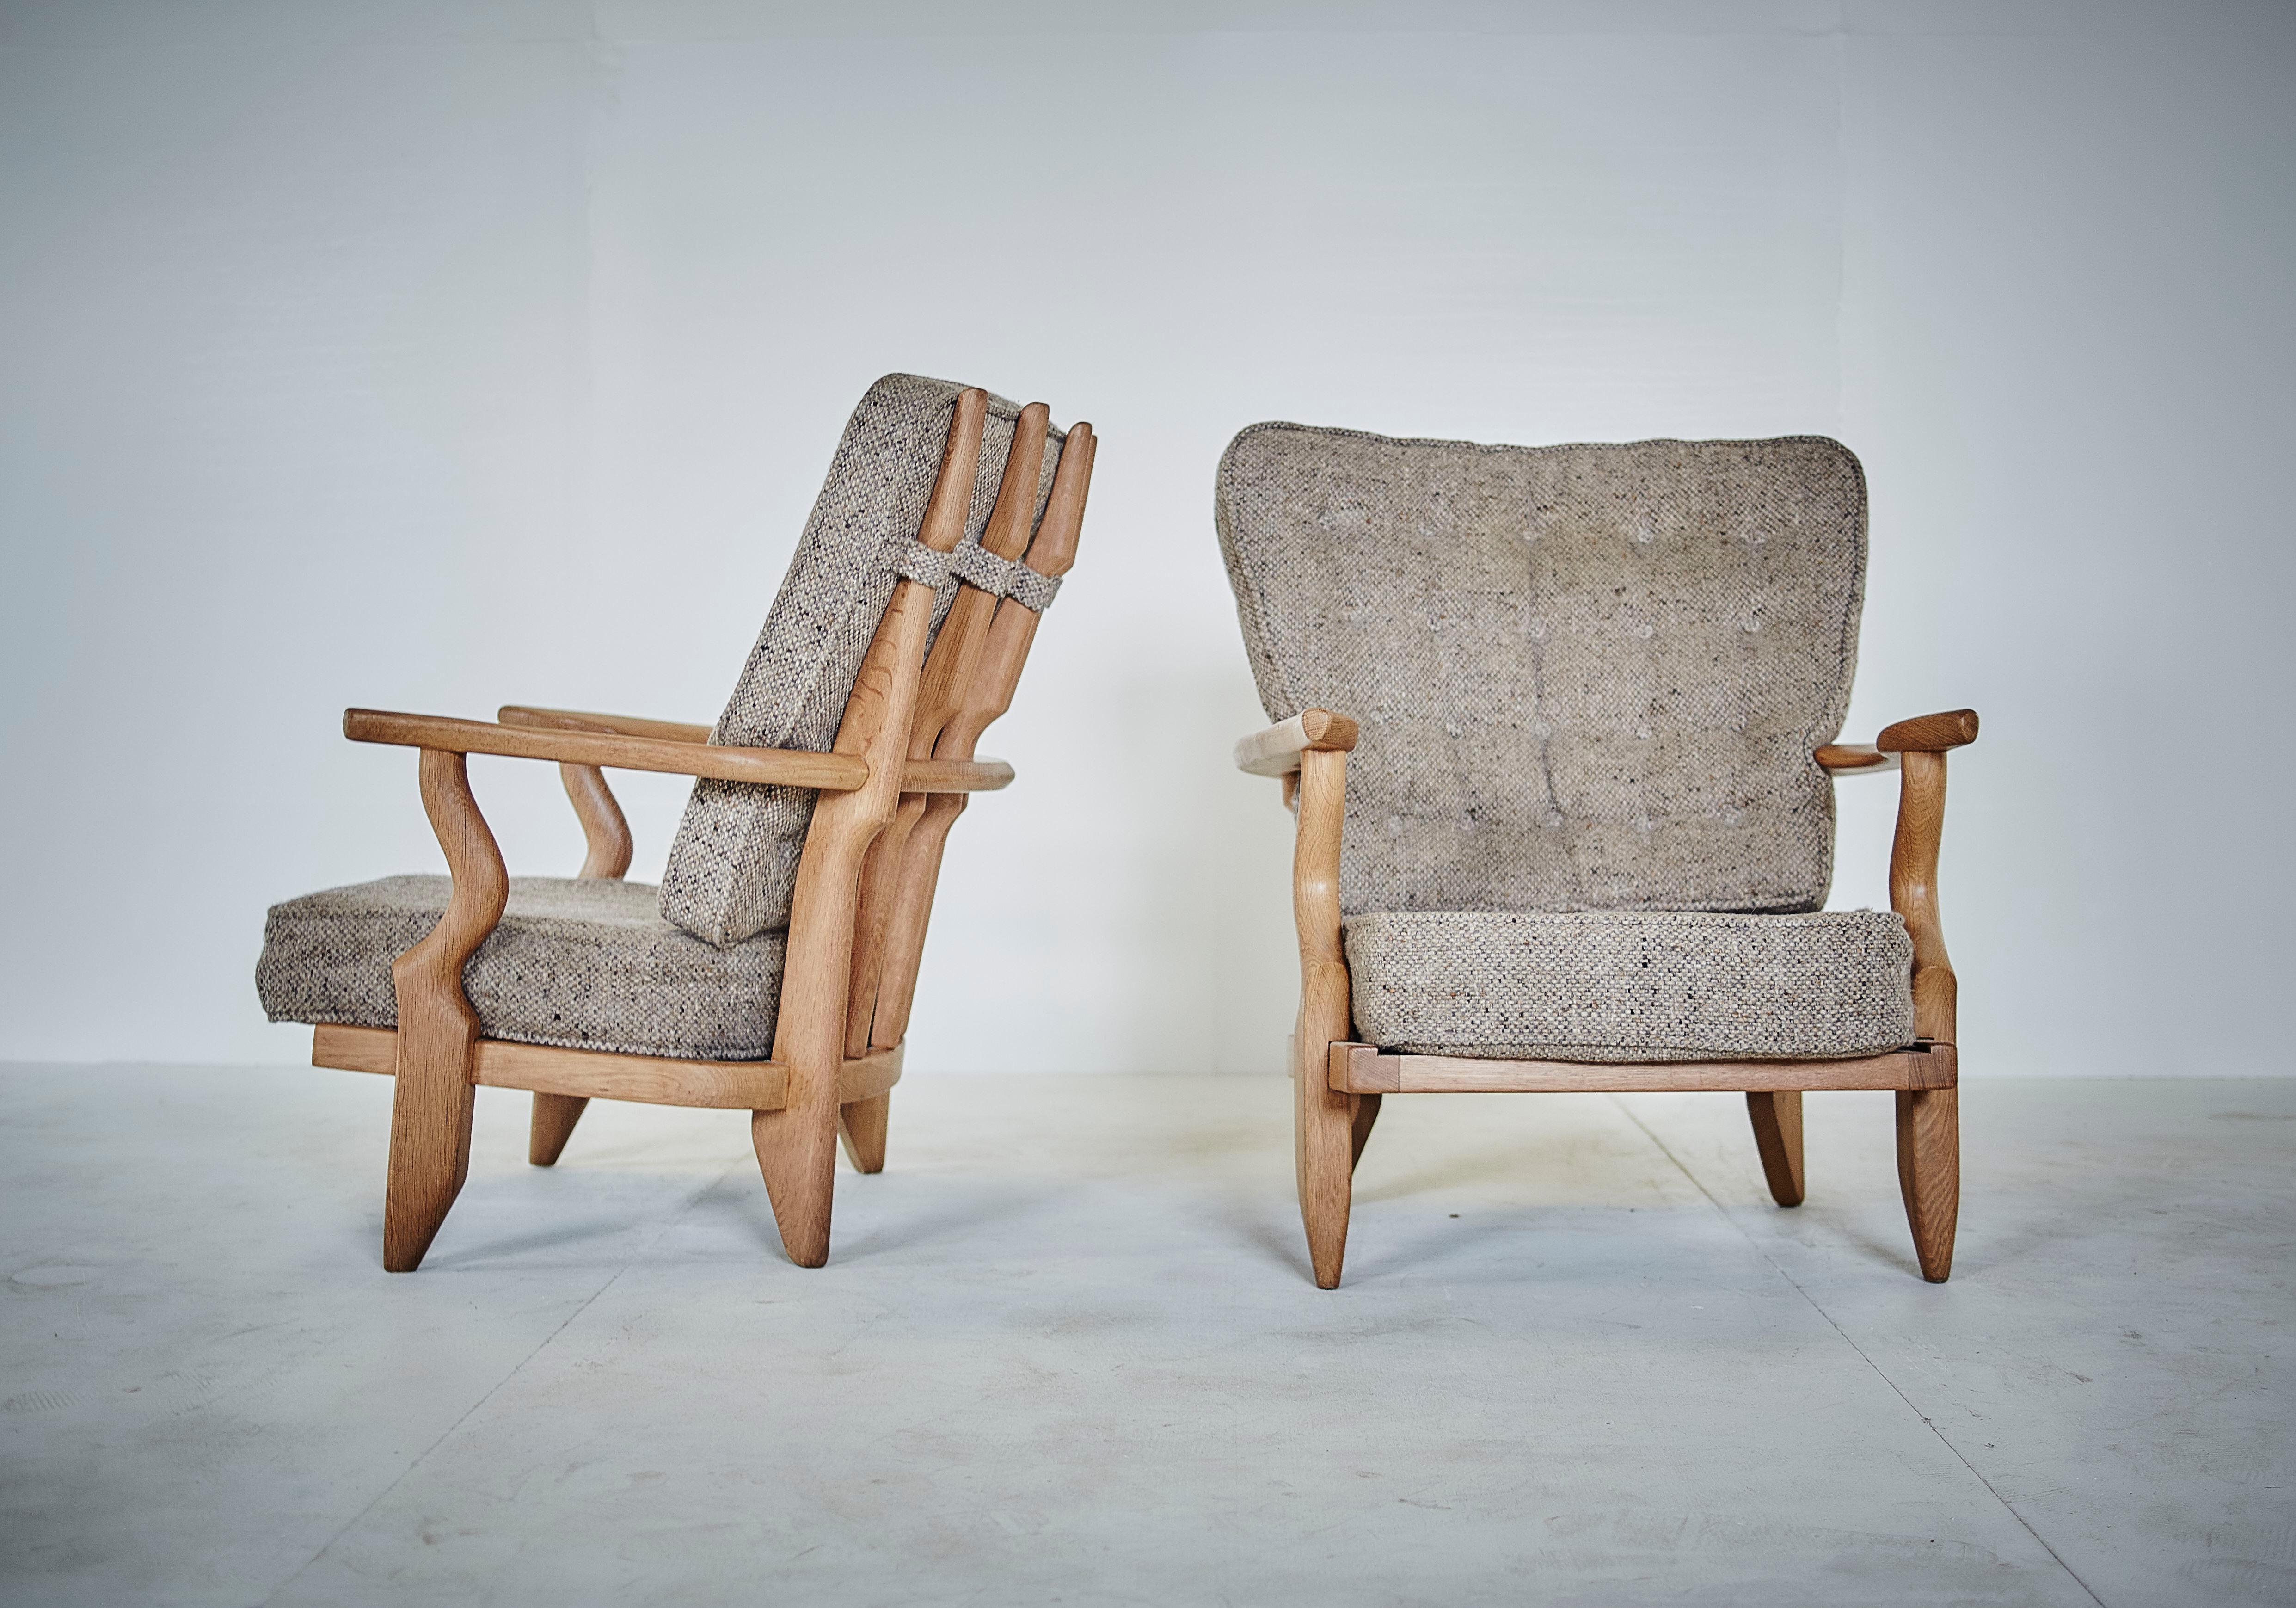 The duo is known for their high-quality solid oak furniture.

Robert Guillerme (1913-1990) and Jacques Chambron (1914-2001).
Their company, Votre Maison, has marked the history of French design. Guillerme et Chambron get acquainted for the first